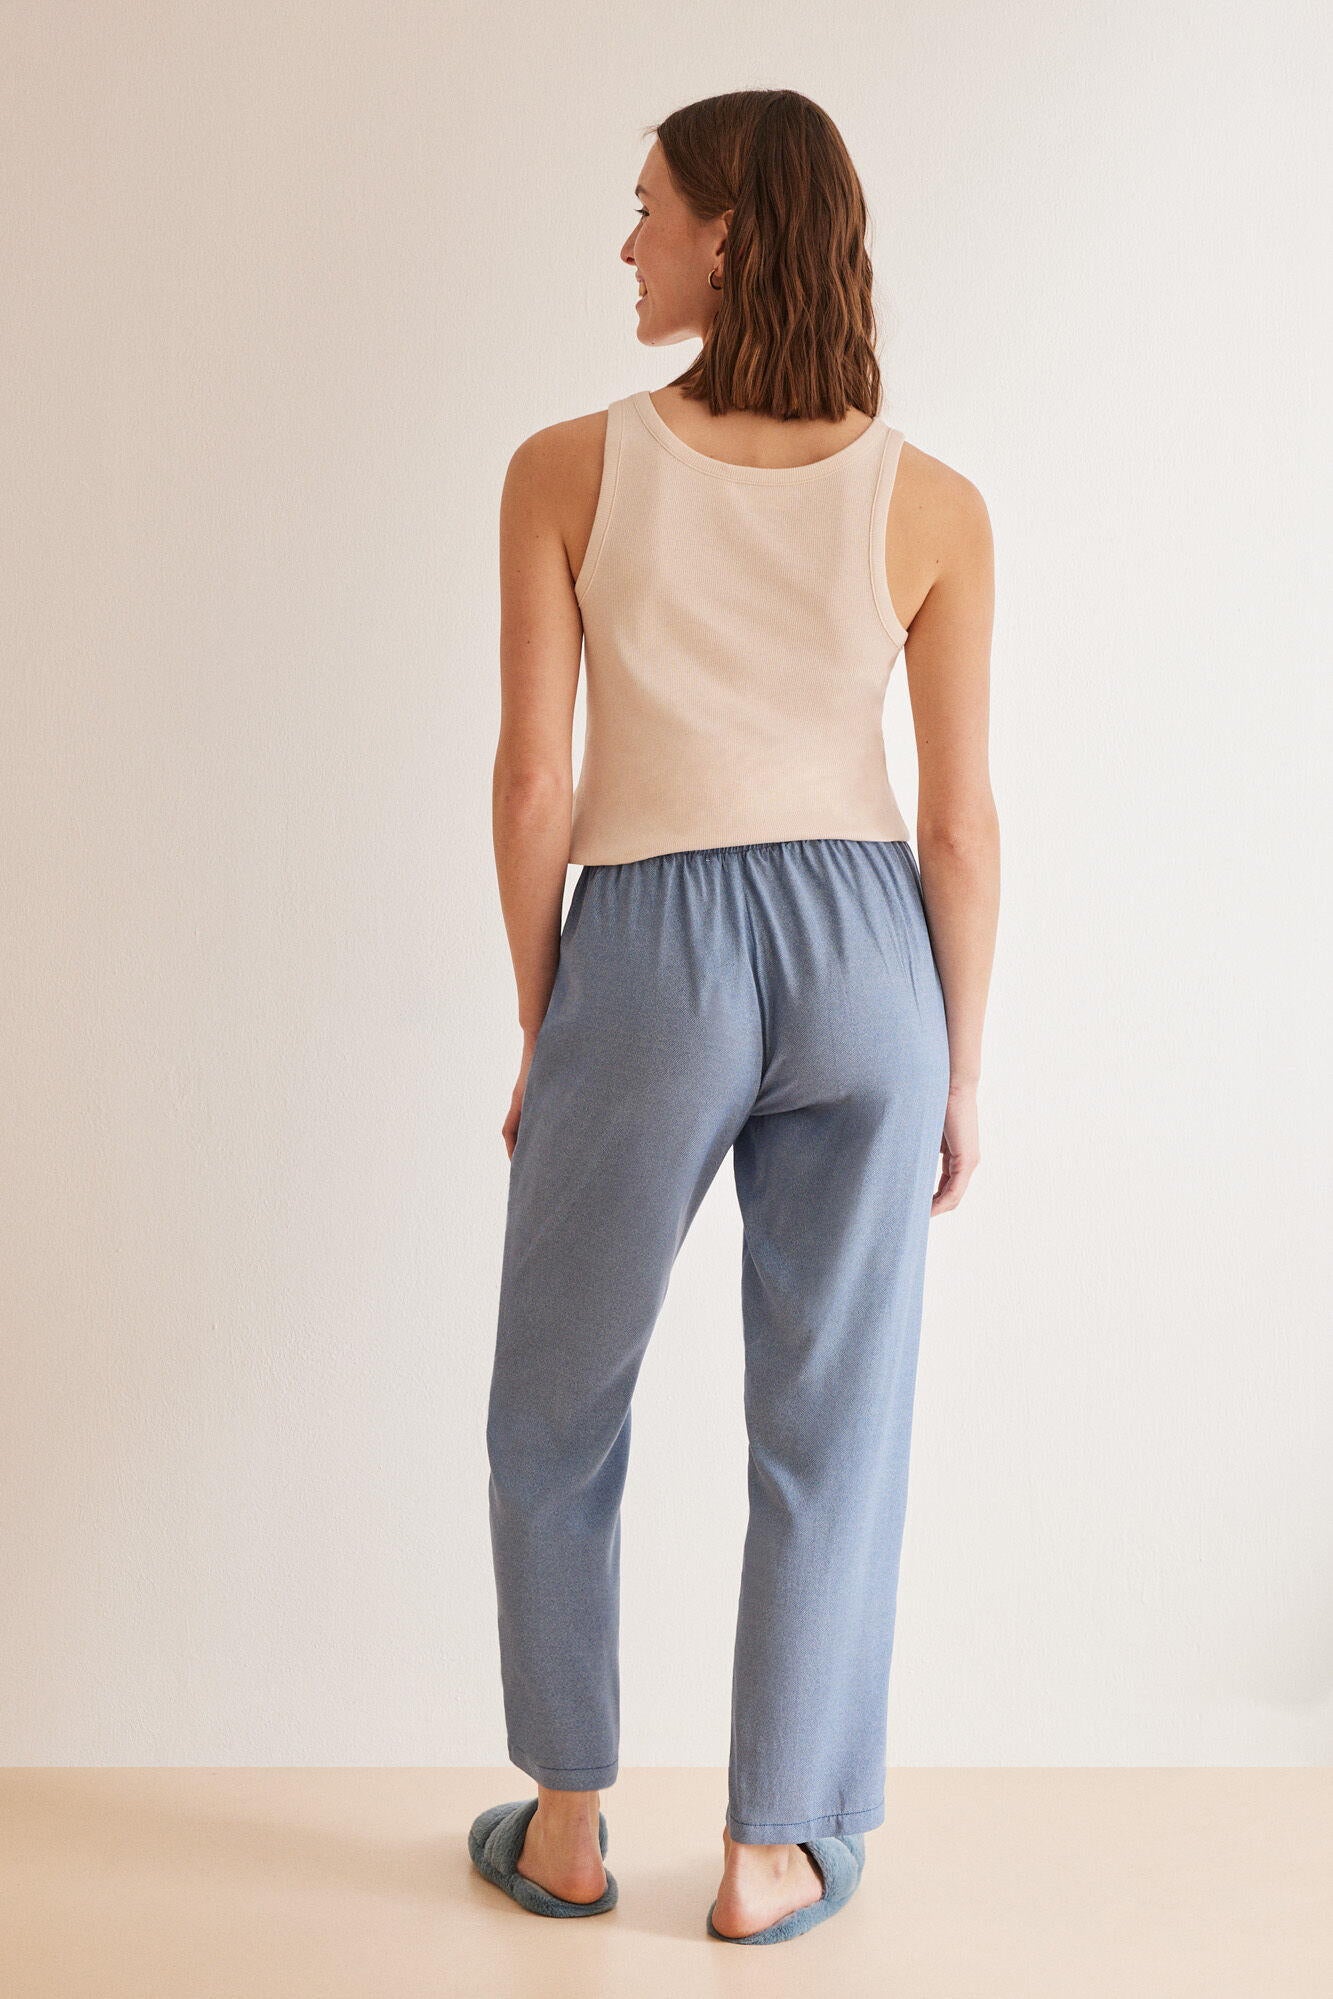 Slip On Lounge Trousers_3707197_19_04